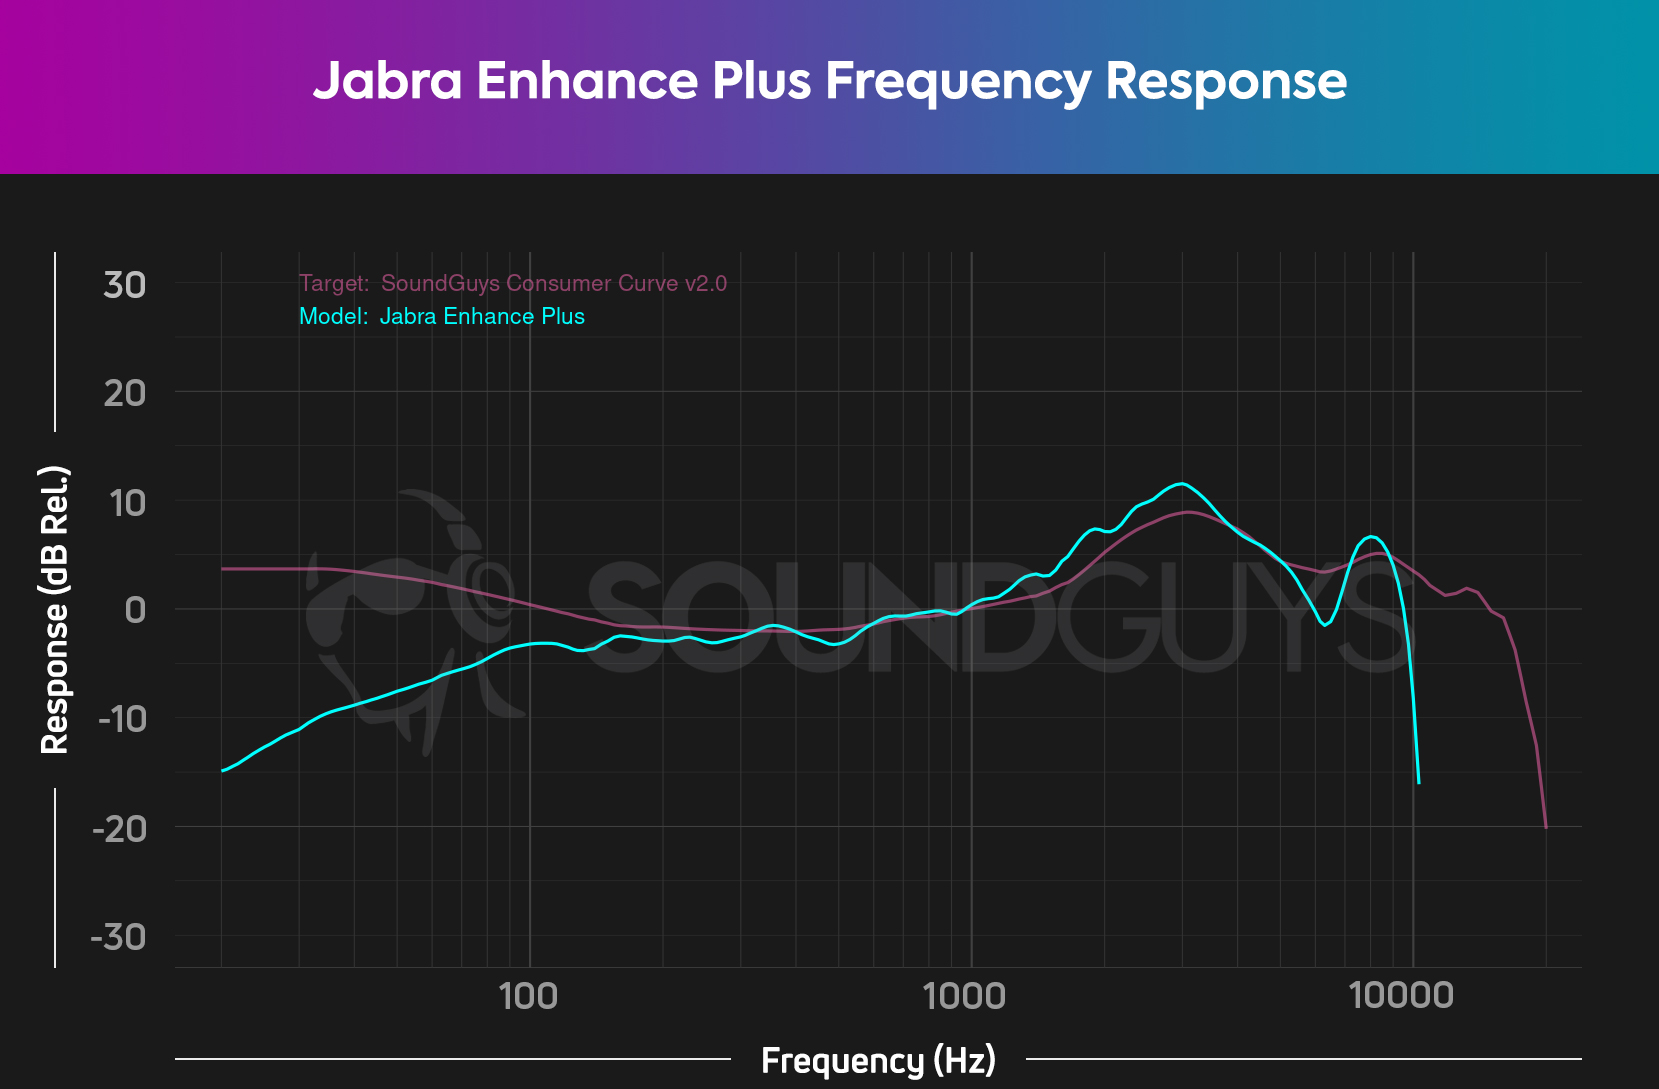 Jabra Enhance Plus frequency response curve in comparison to SoundGuys consumer curve.